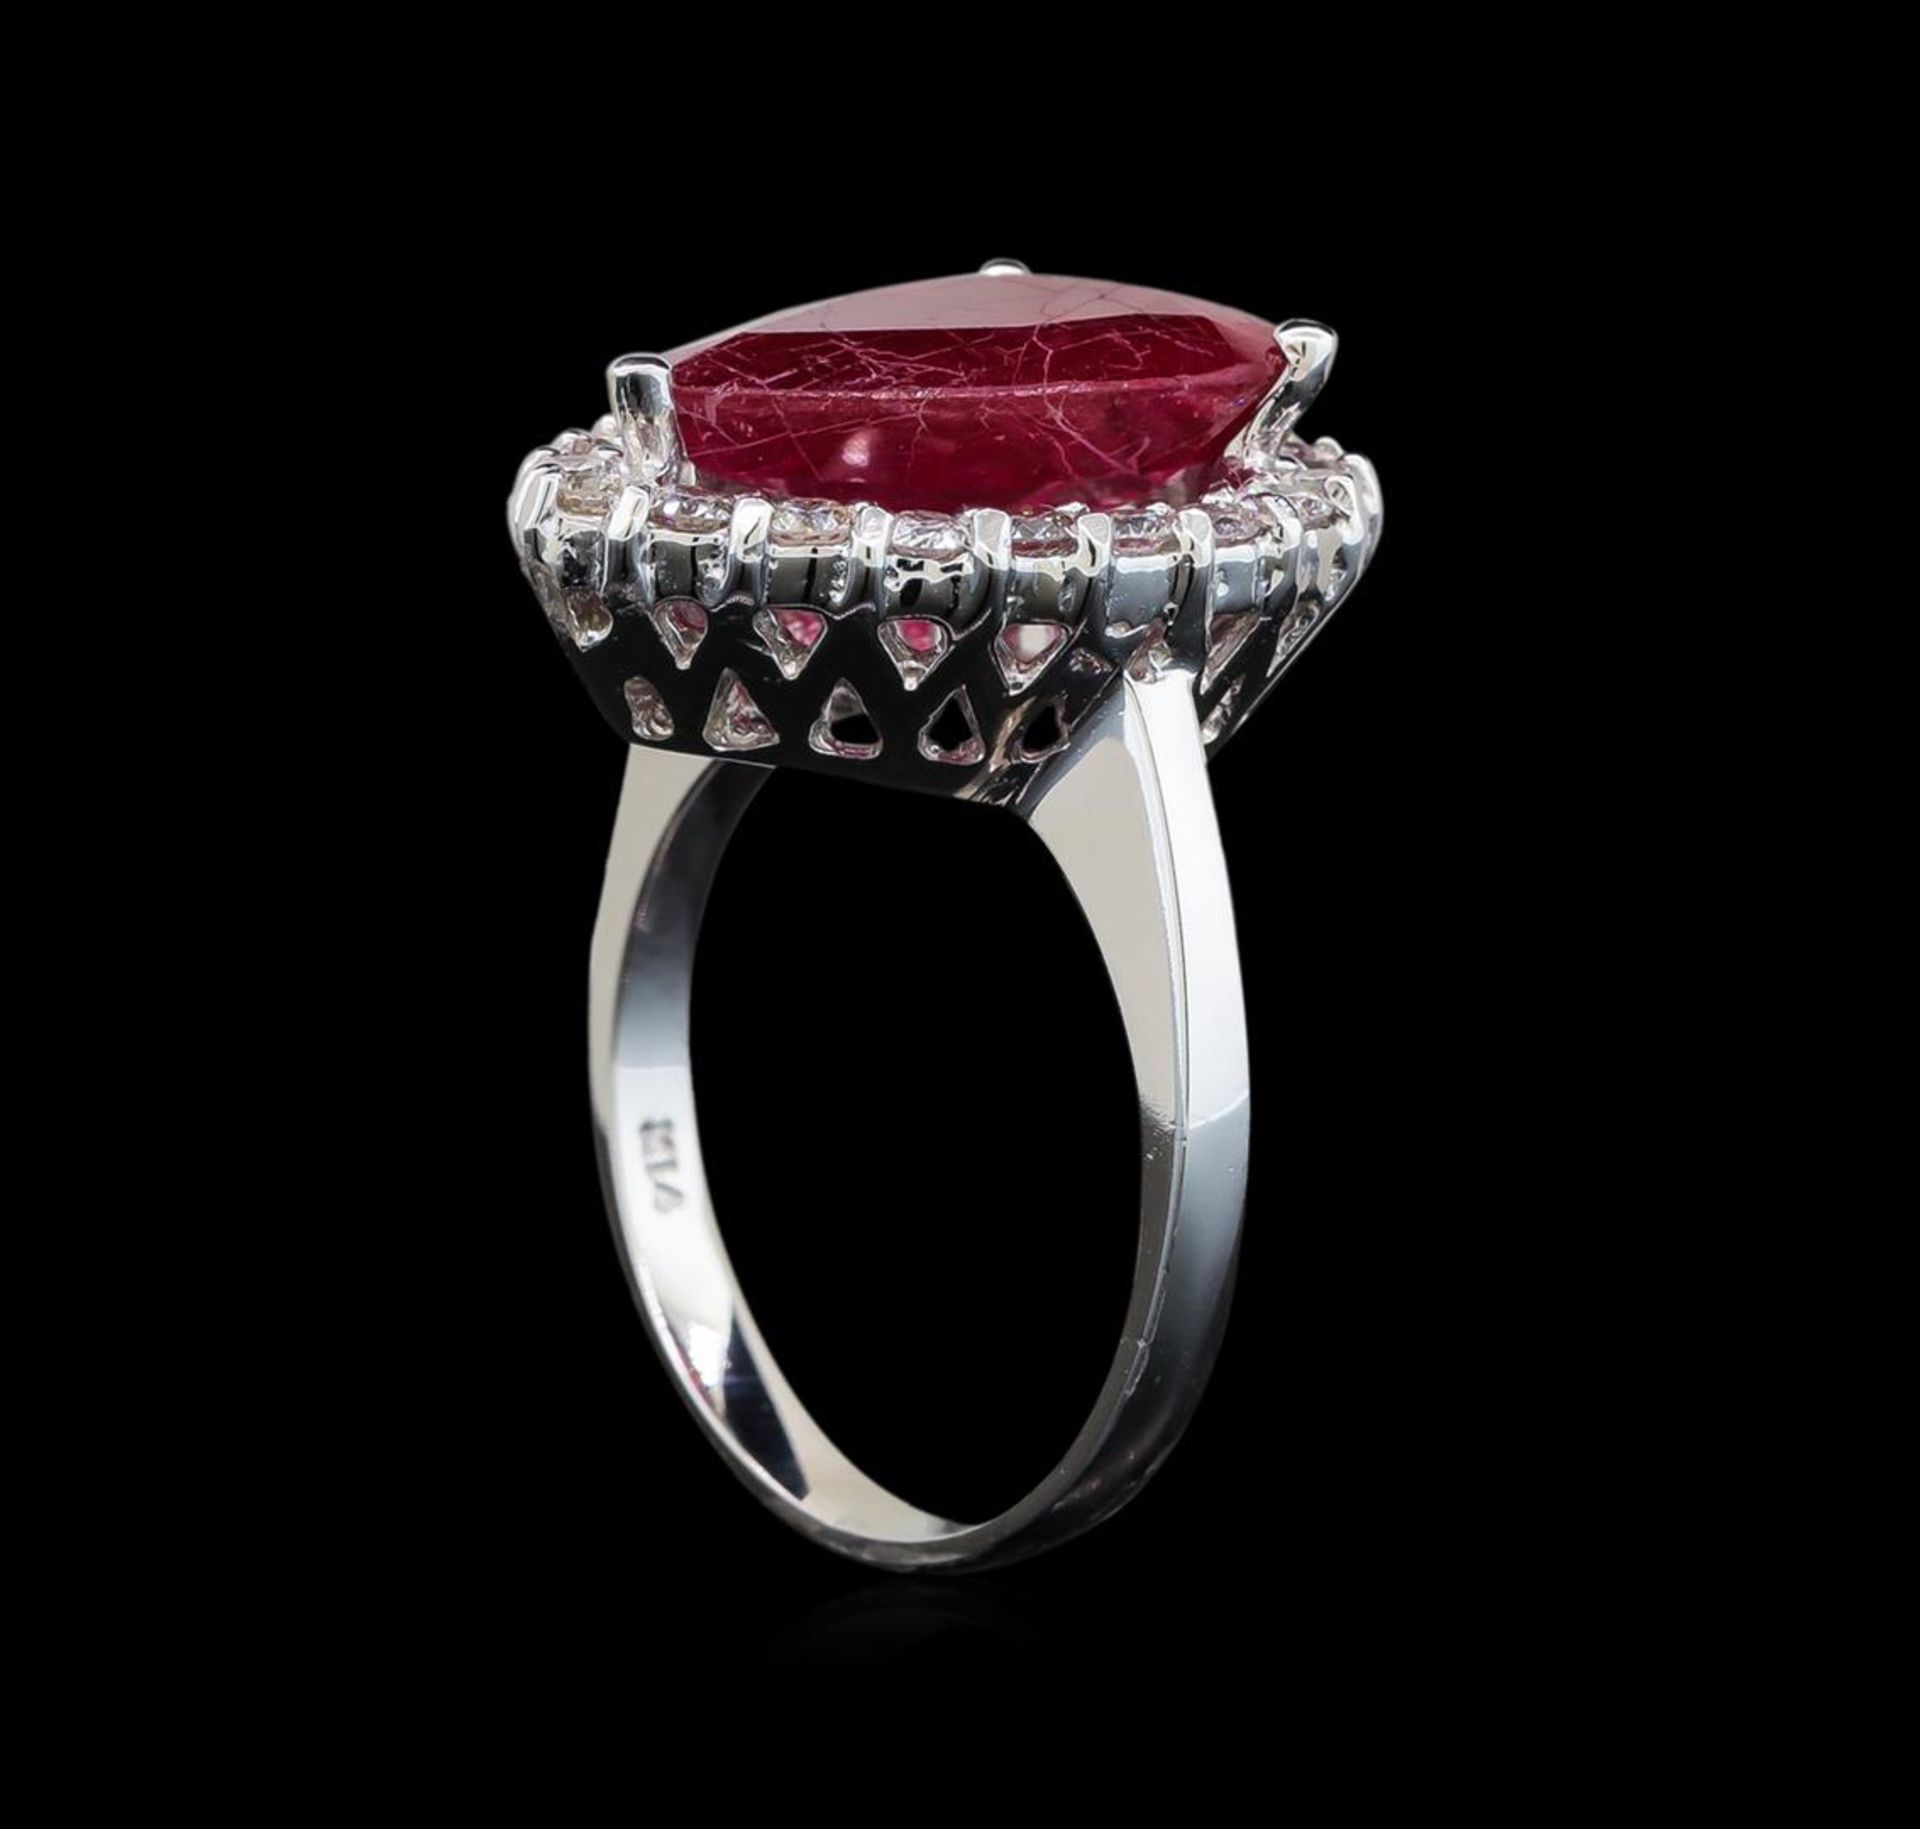 14KT White Gold 5.88 ctw Ruby and Diamond Ring - Image 4 of 5